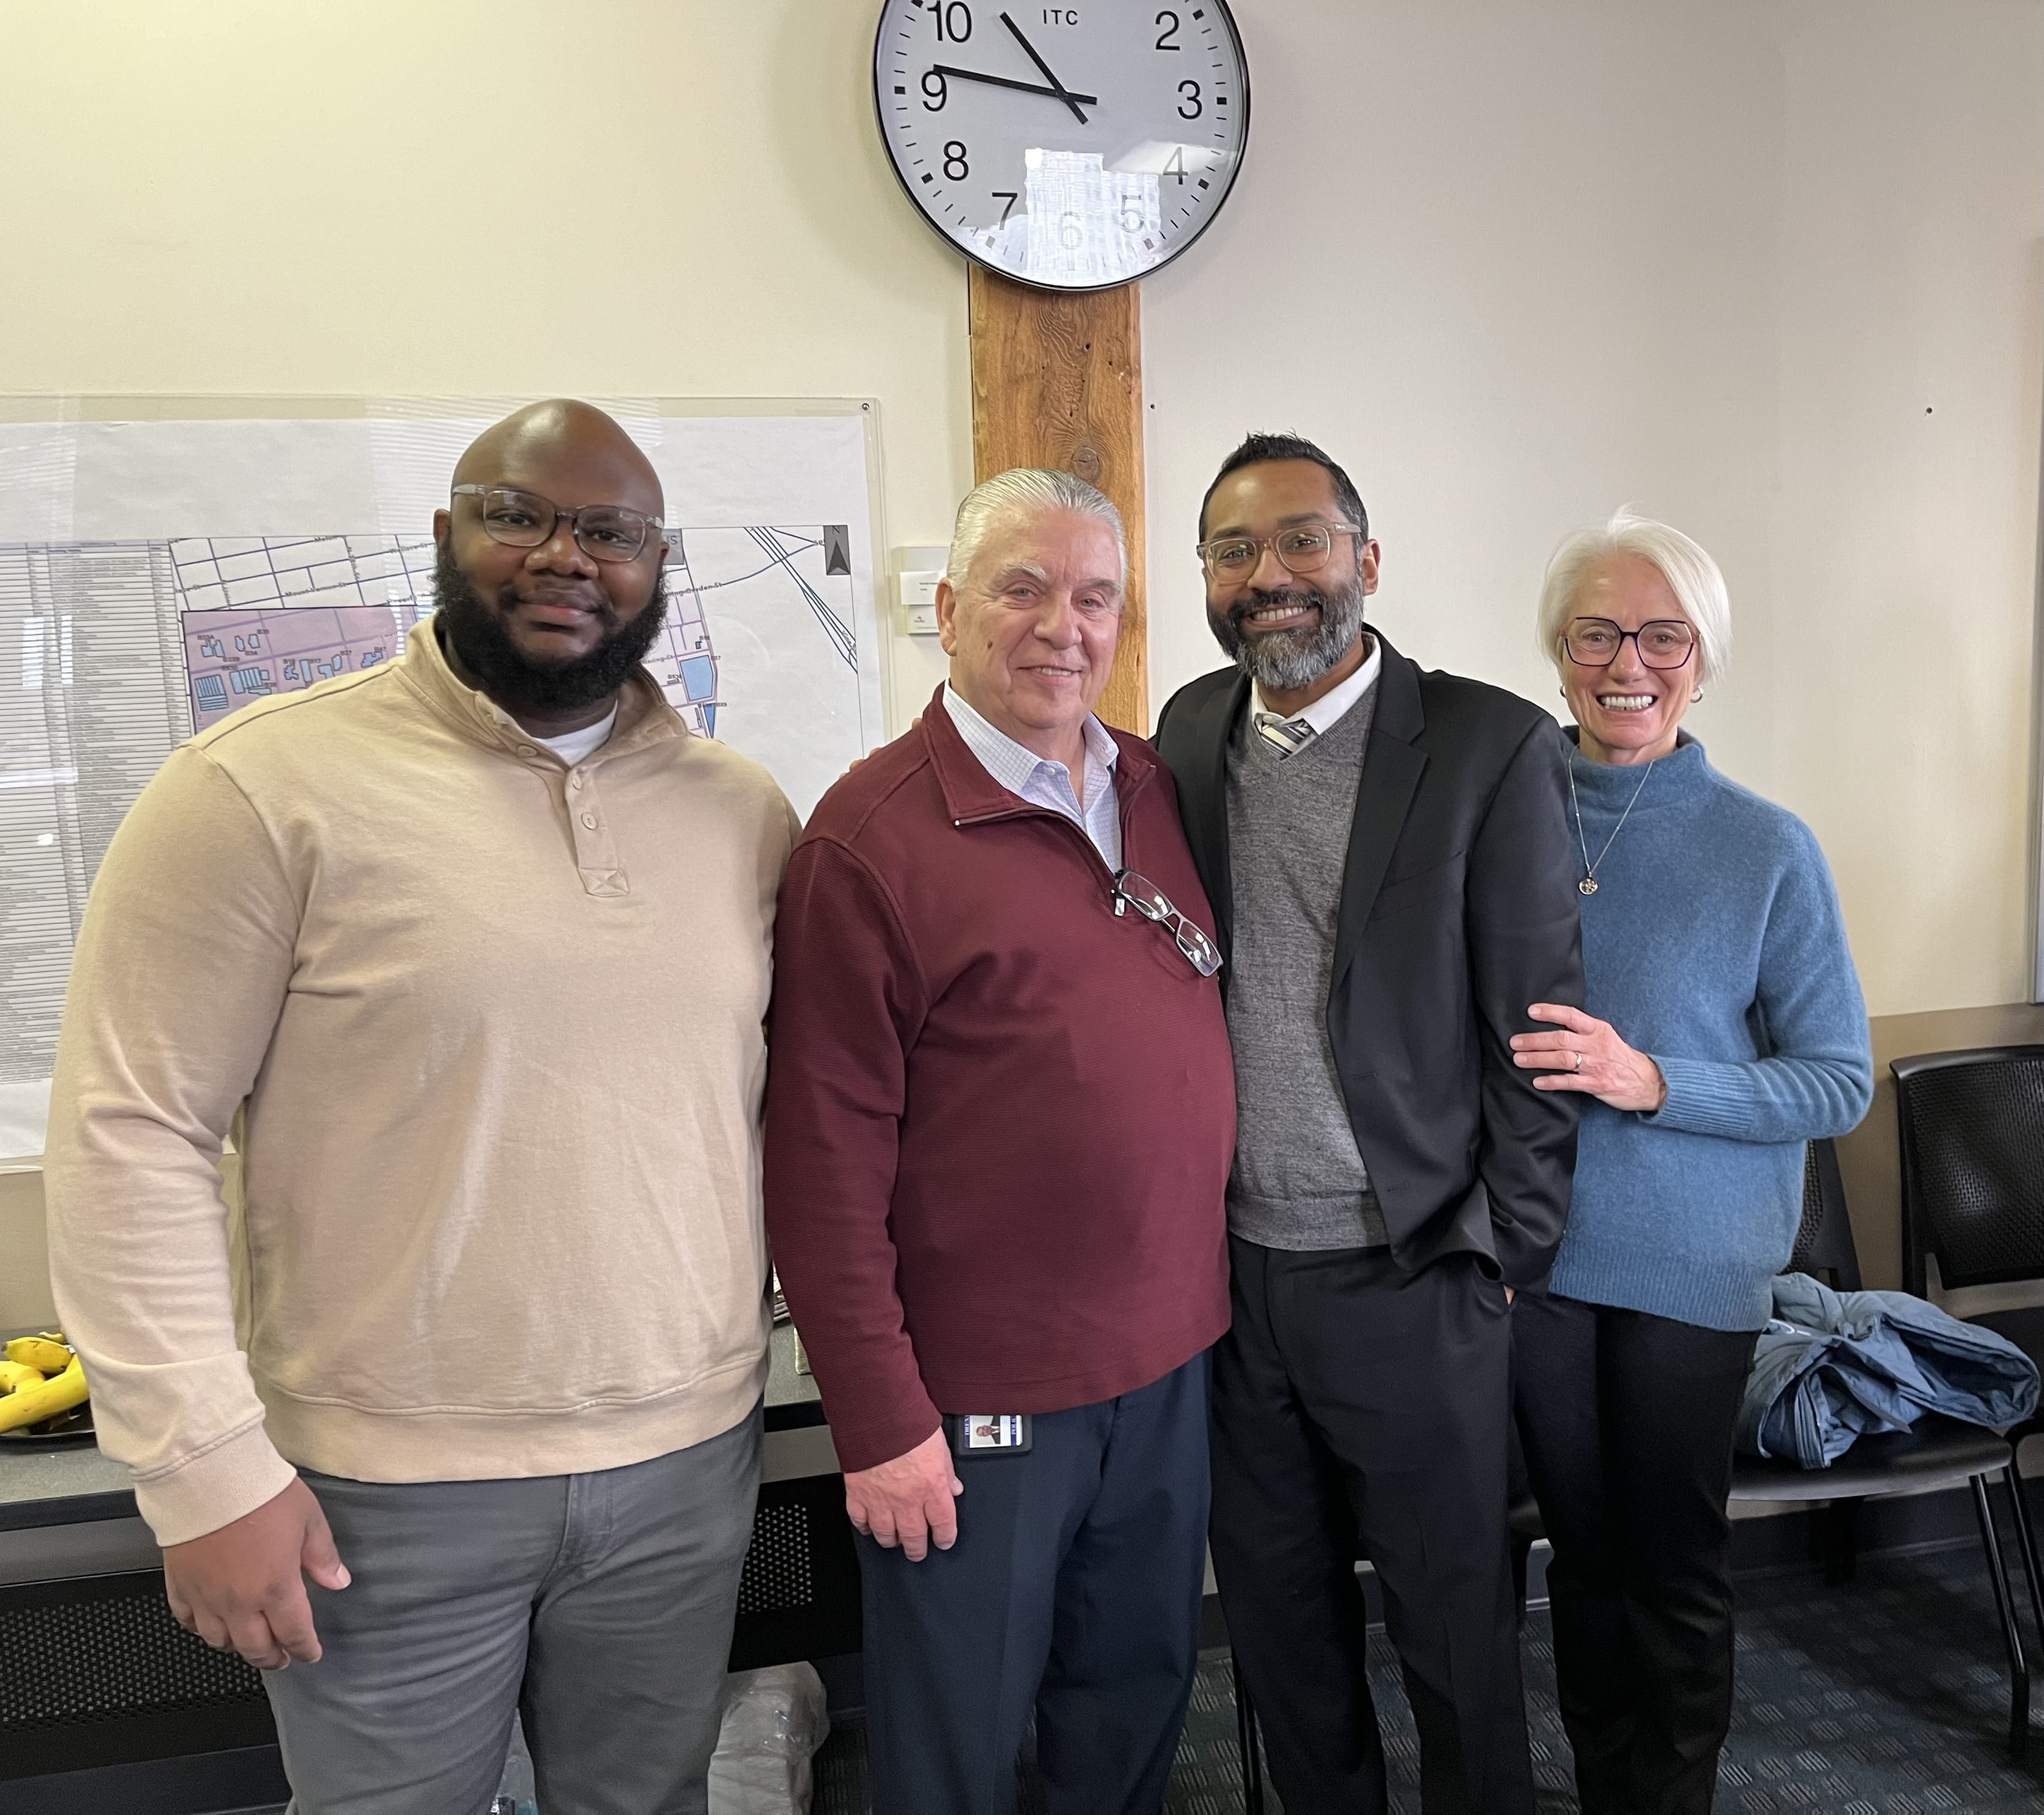 Bob Lis (second from the left) poses with Drexel colleagues Xavier Johnson (far left), Subir Sahu (second from the right) and Annette Molyneux (far right).